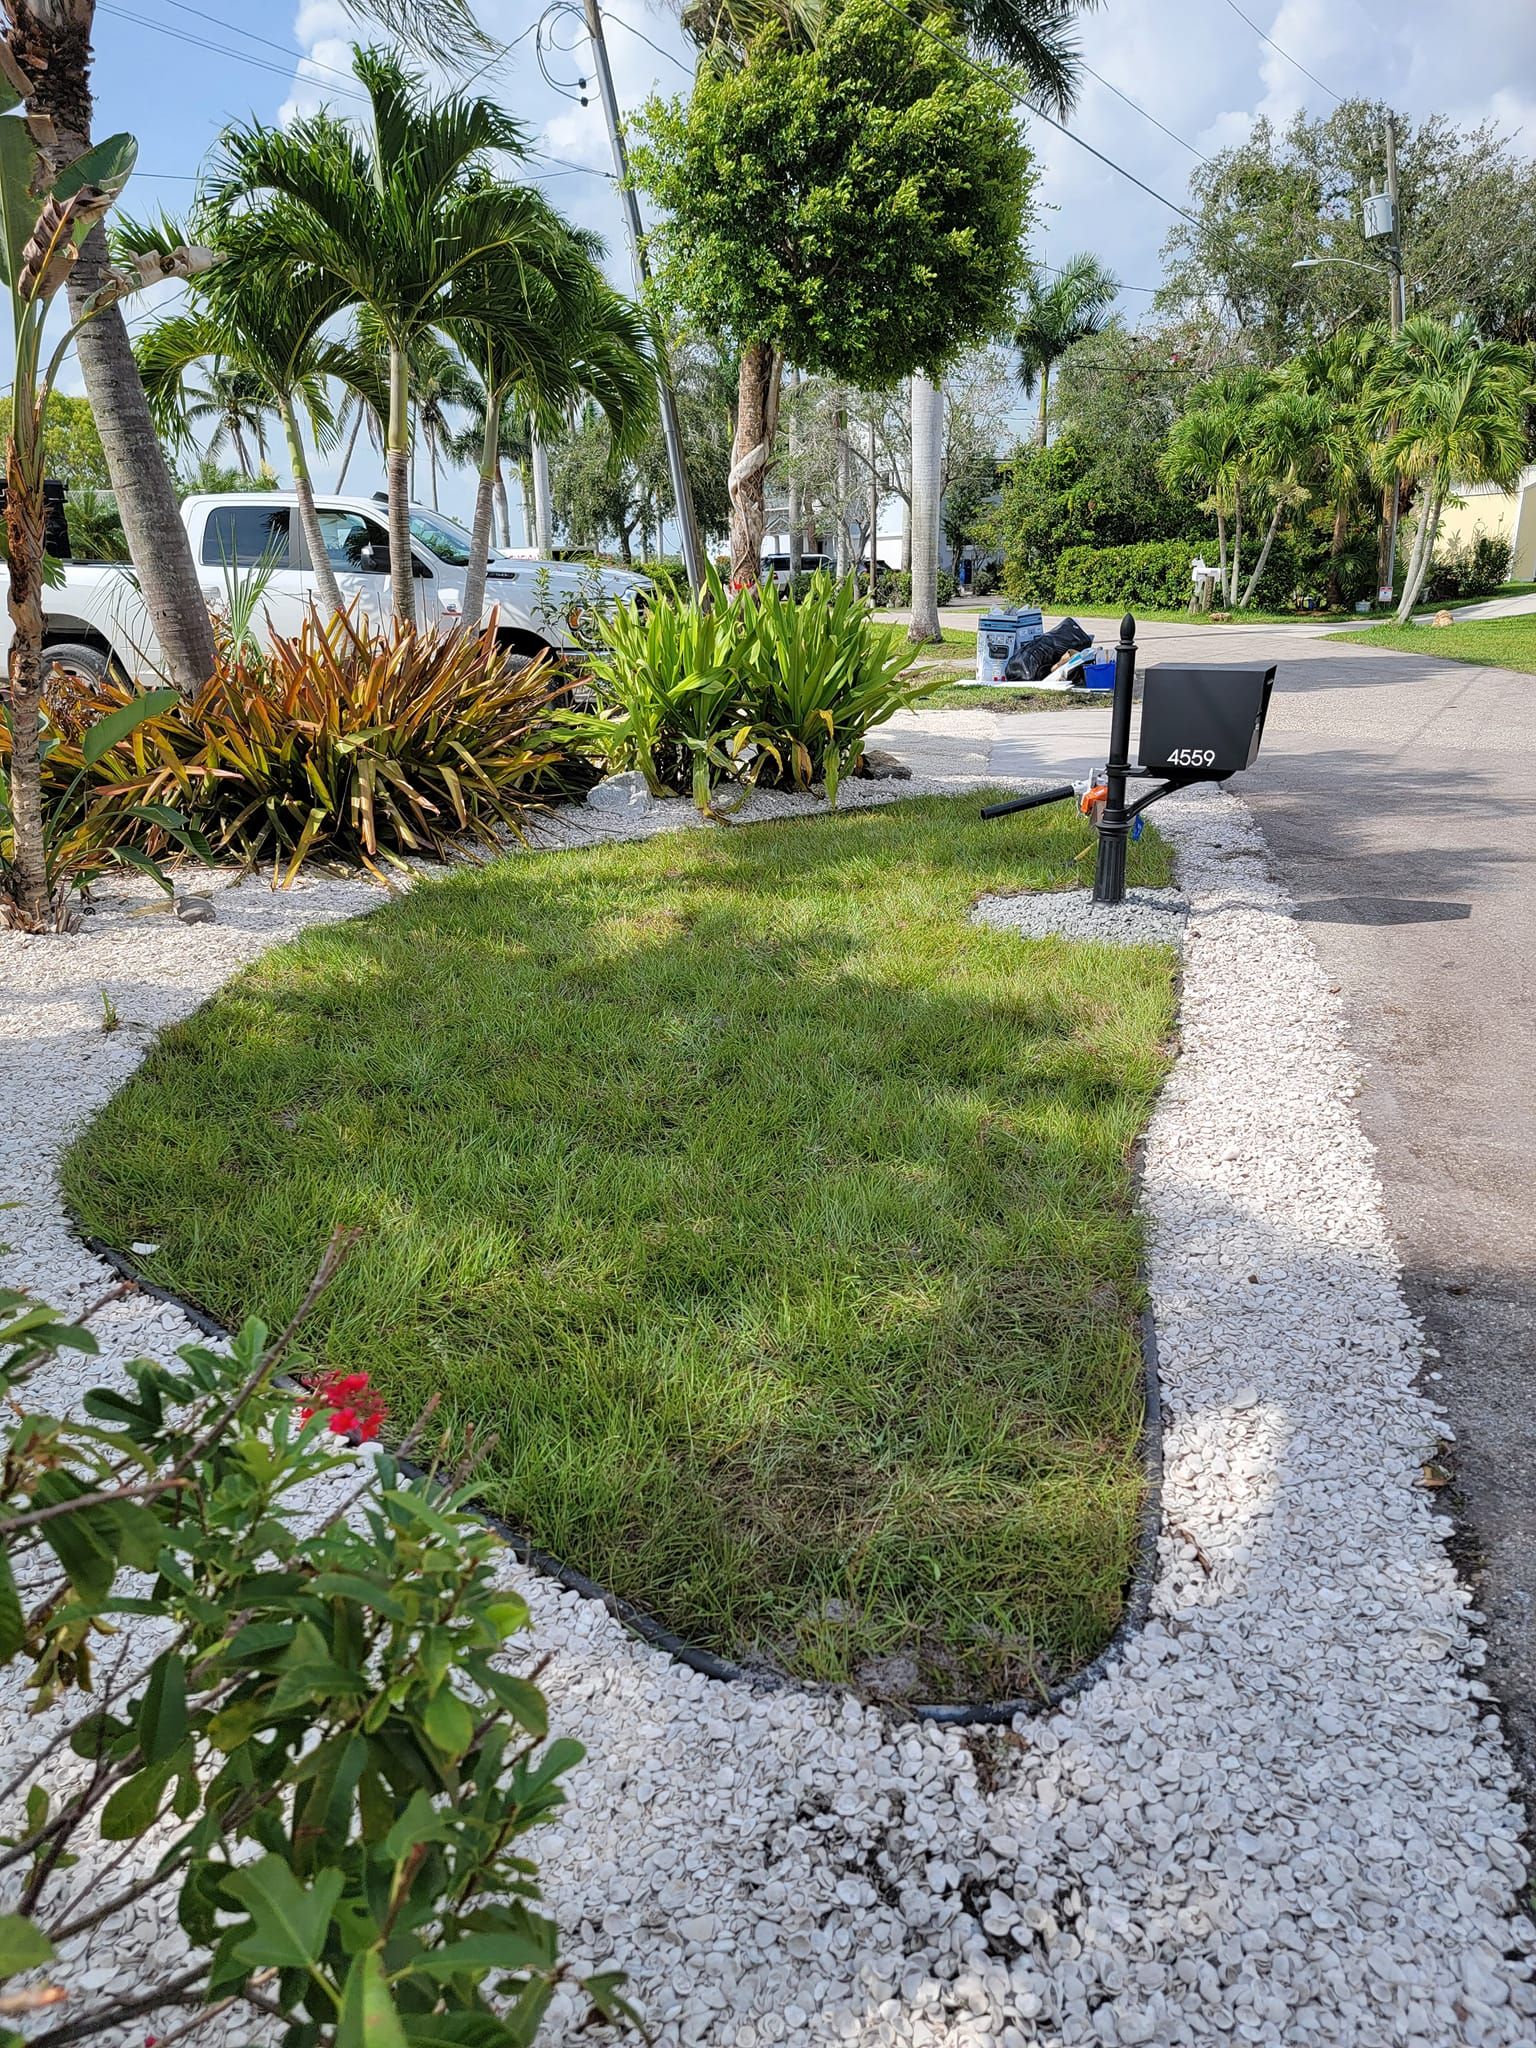 Landscaping for Advanced Landscaping Solutions LLC in Fort Myers, FL